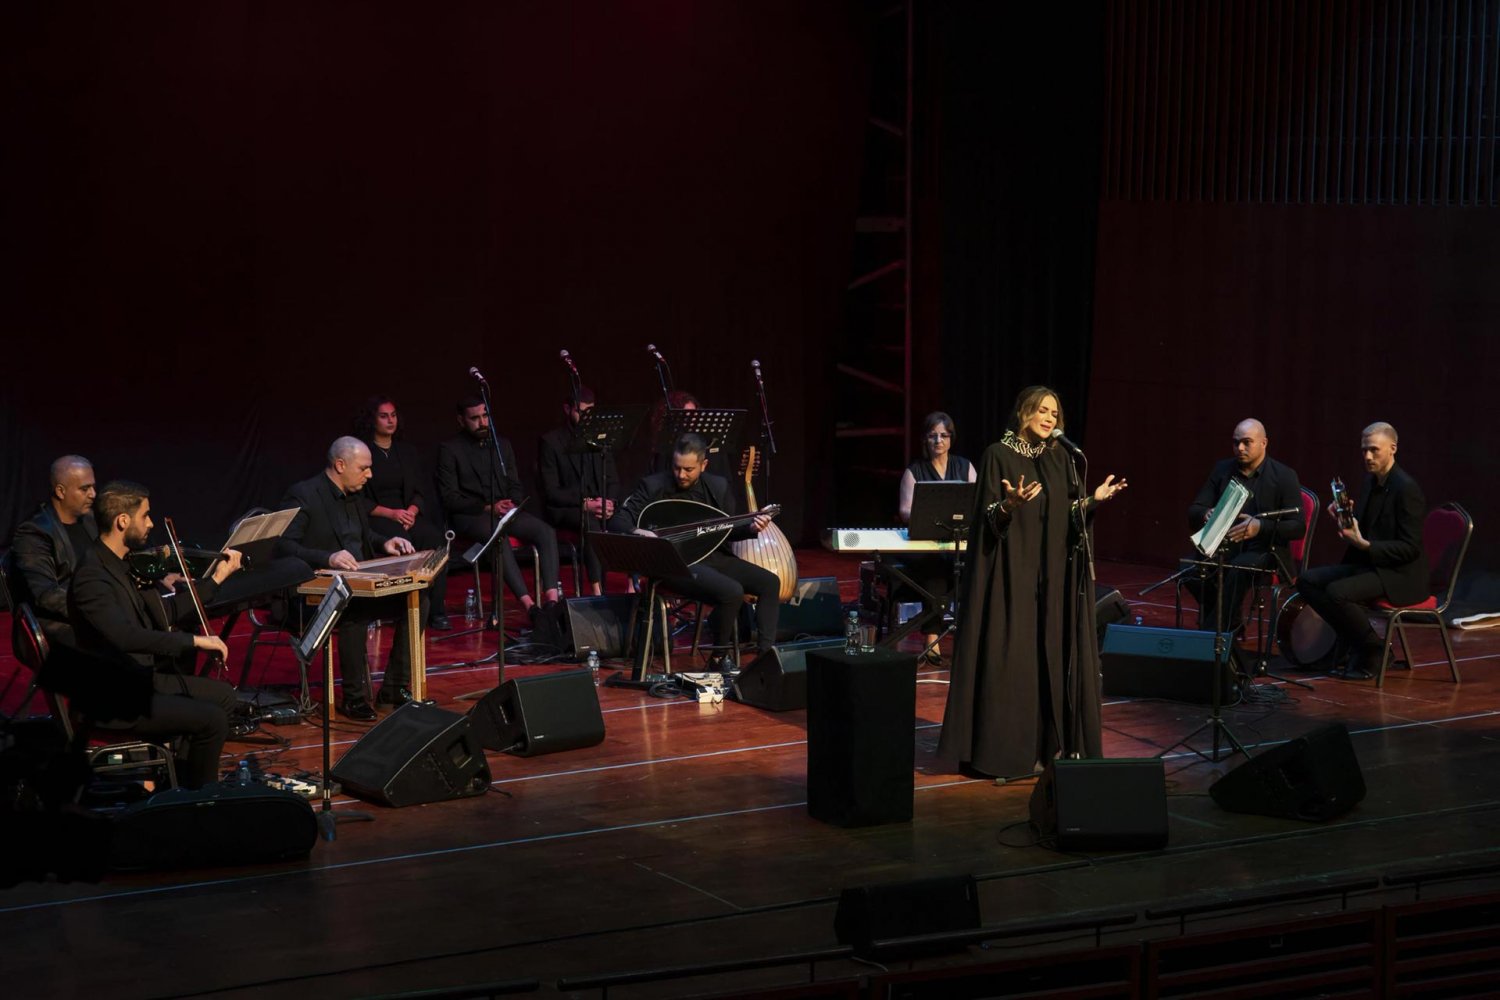 Dalal Abu Amneh performs at a music festival sponsored by Yabous Cultural Centre, Jerusalem, September 16, 2022